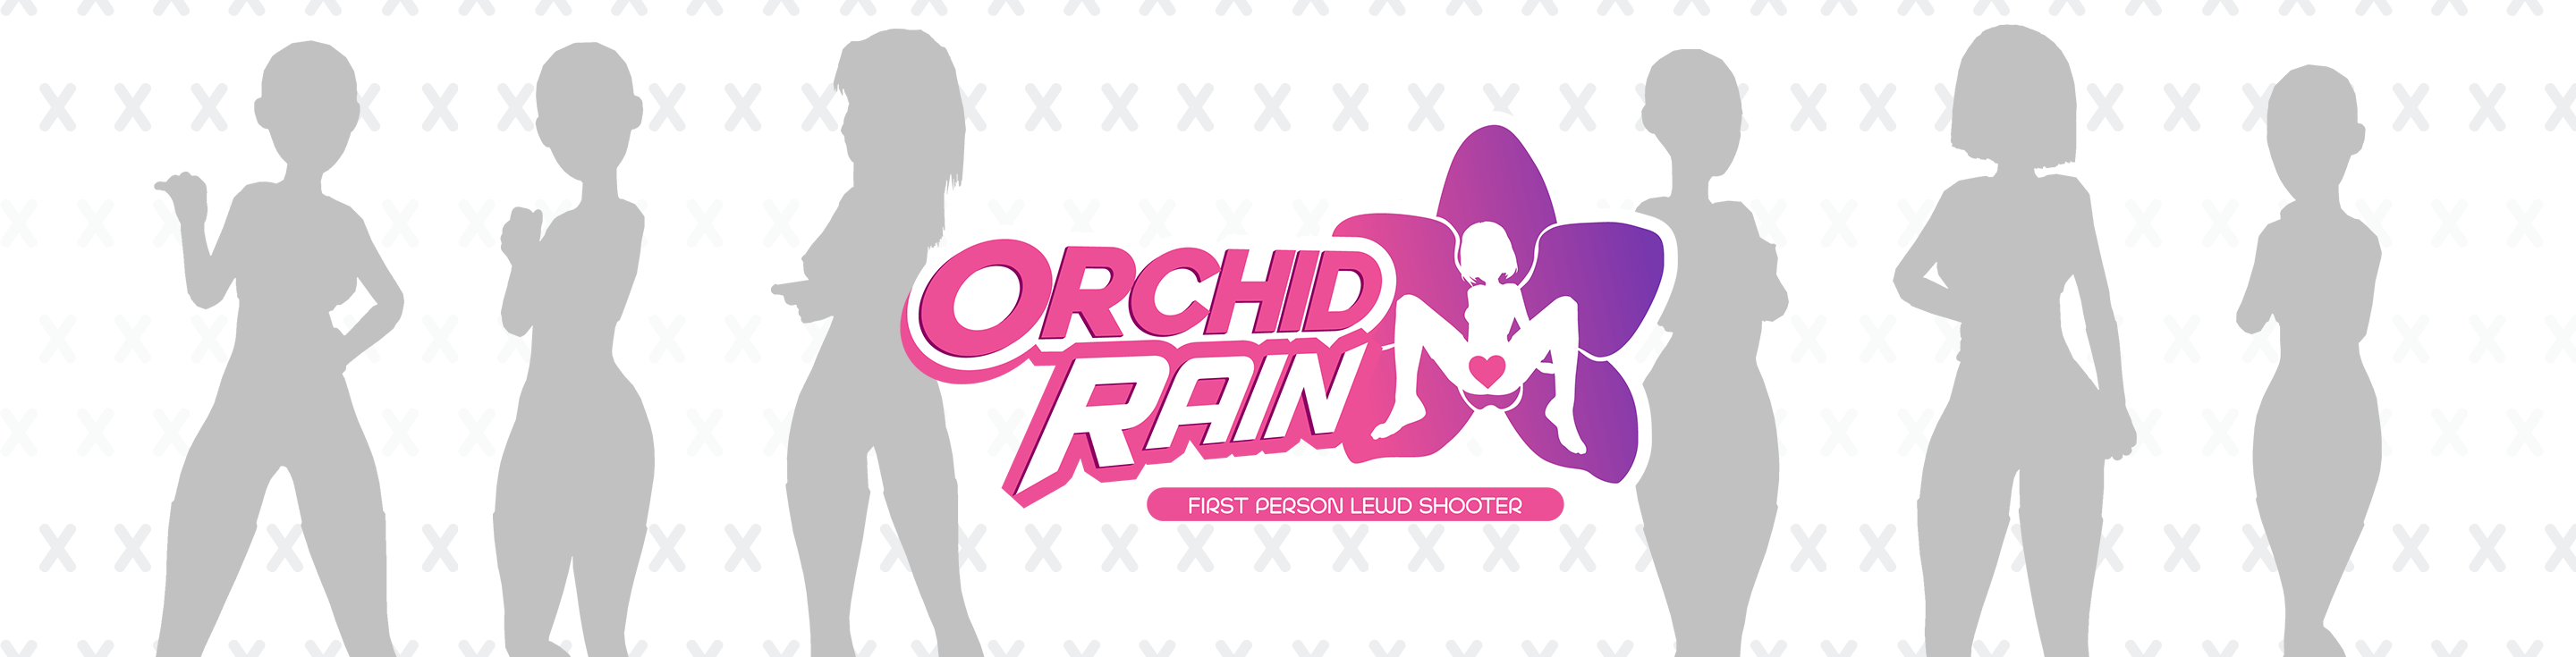 Orchid Rain - Mission 06 build (outdated)